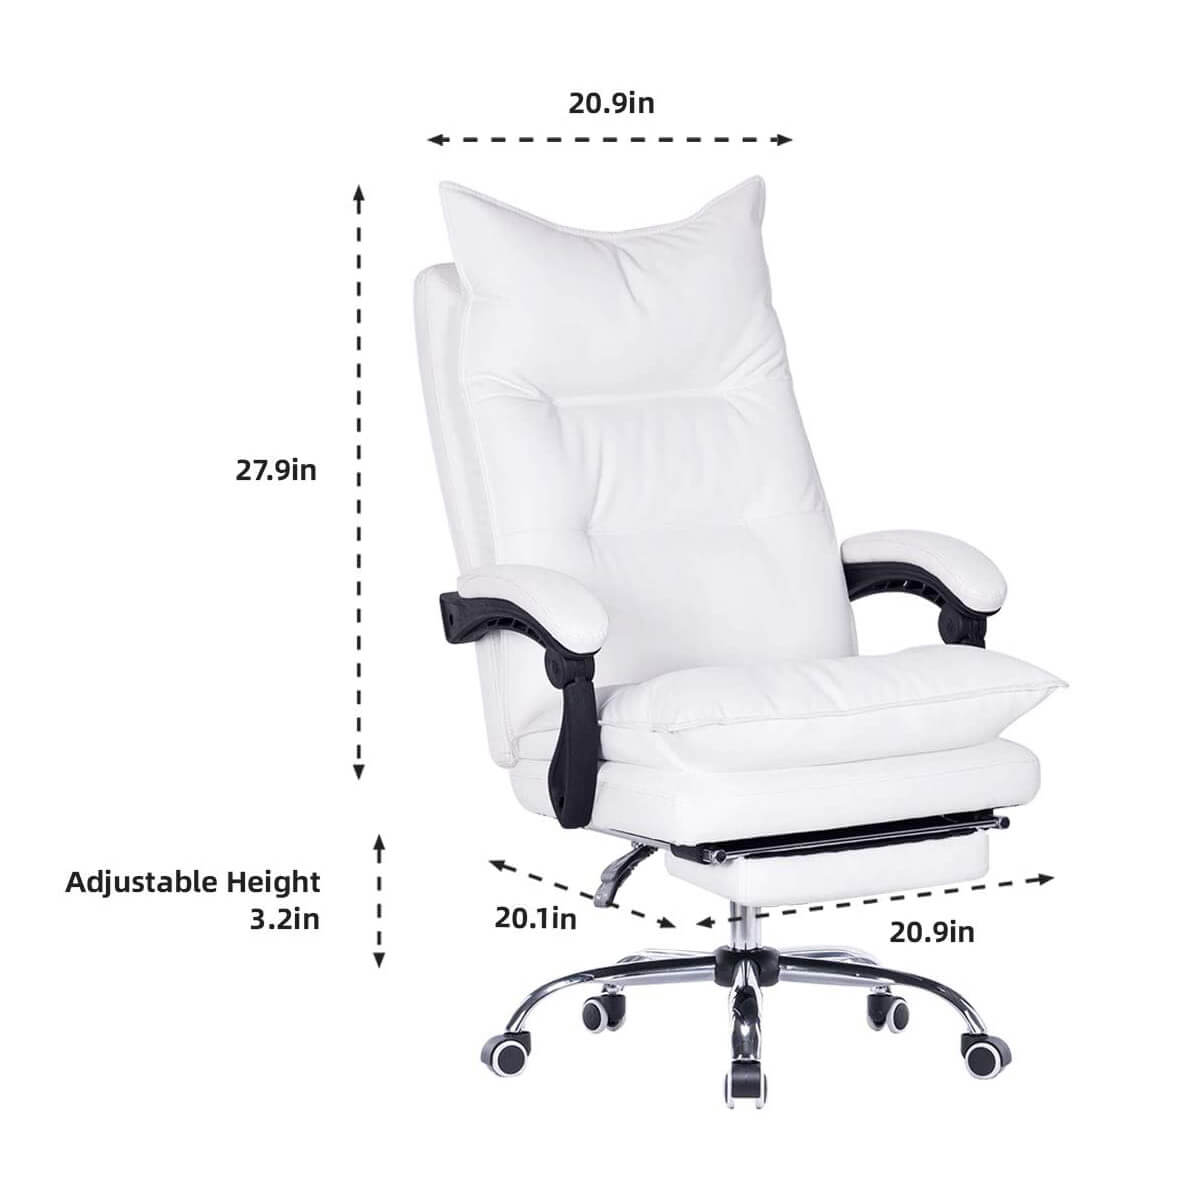 High Back Office Chair PU Leather Executive Desk Chair Ergonomic Swivel Task Chair with Footrest, White